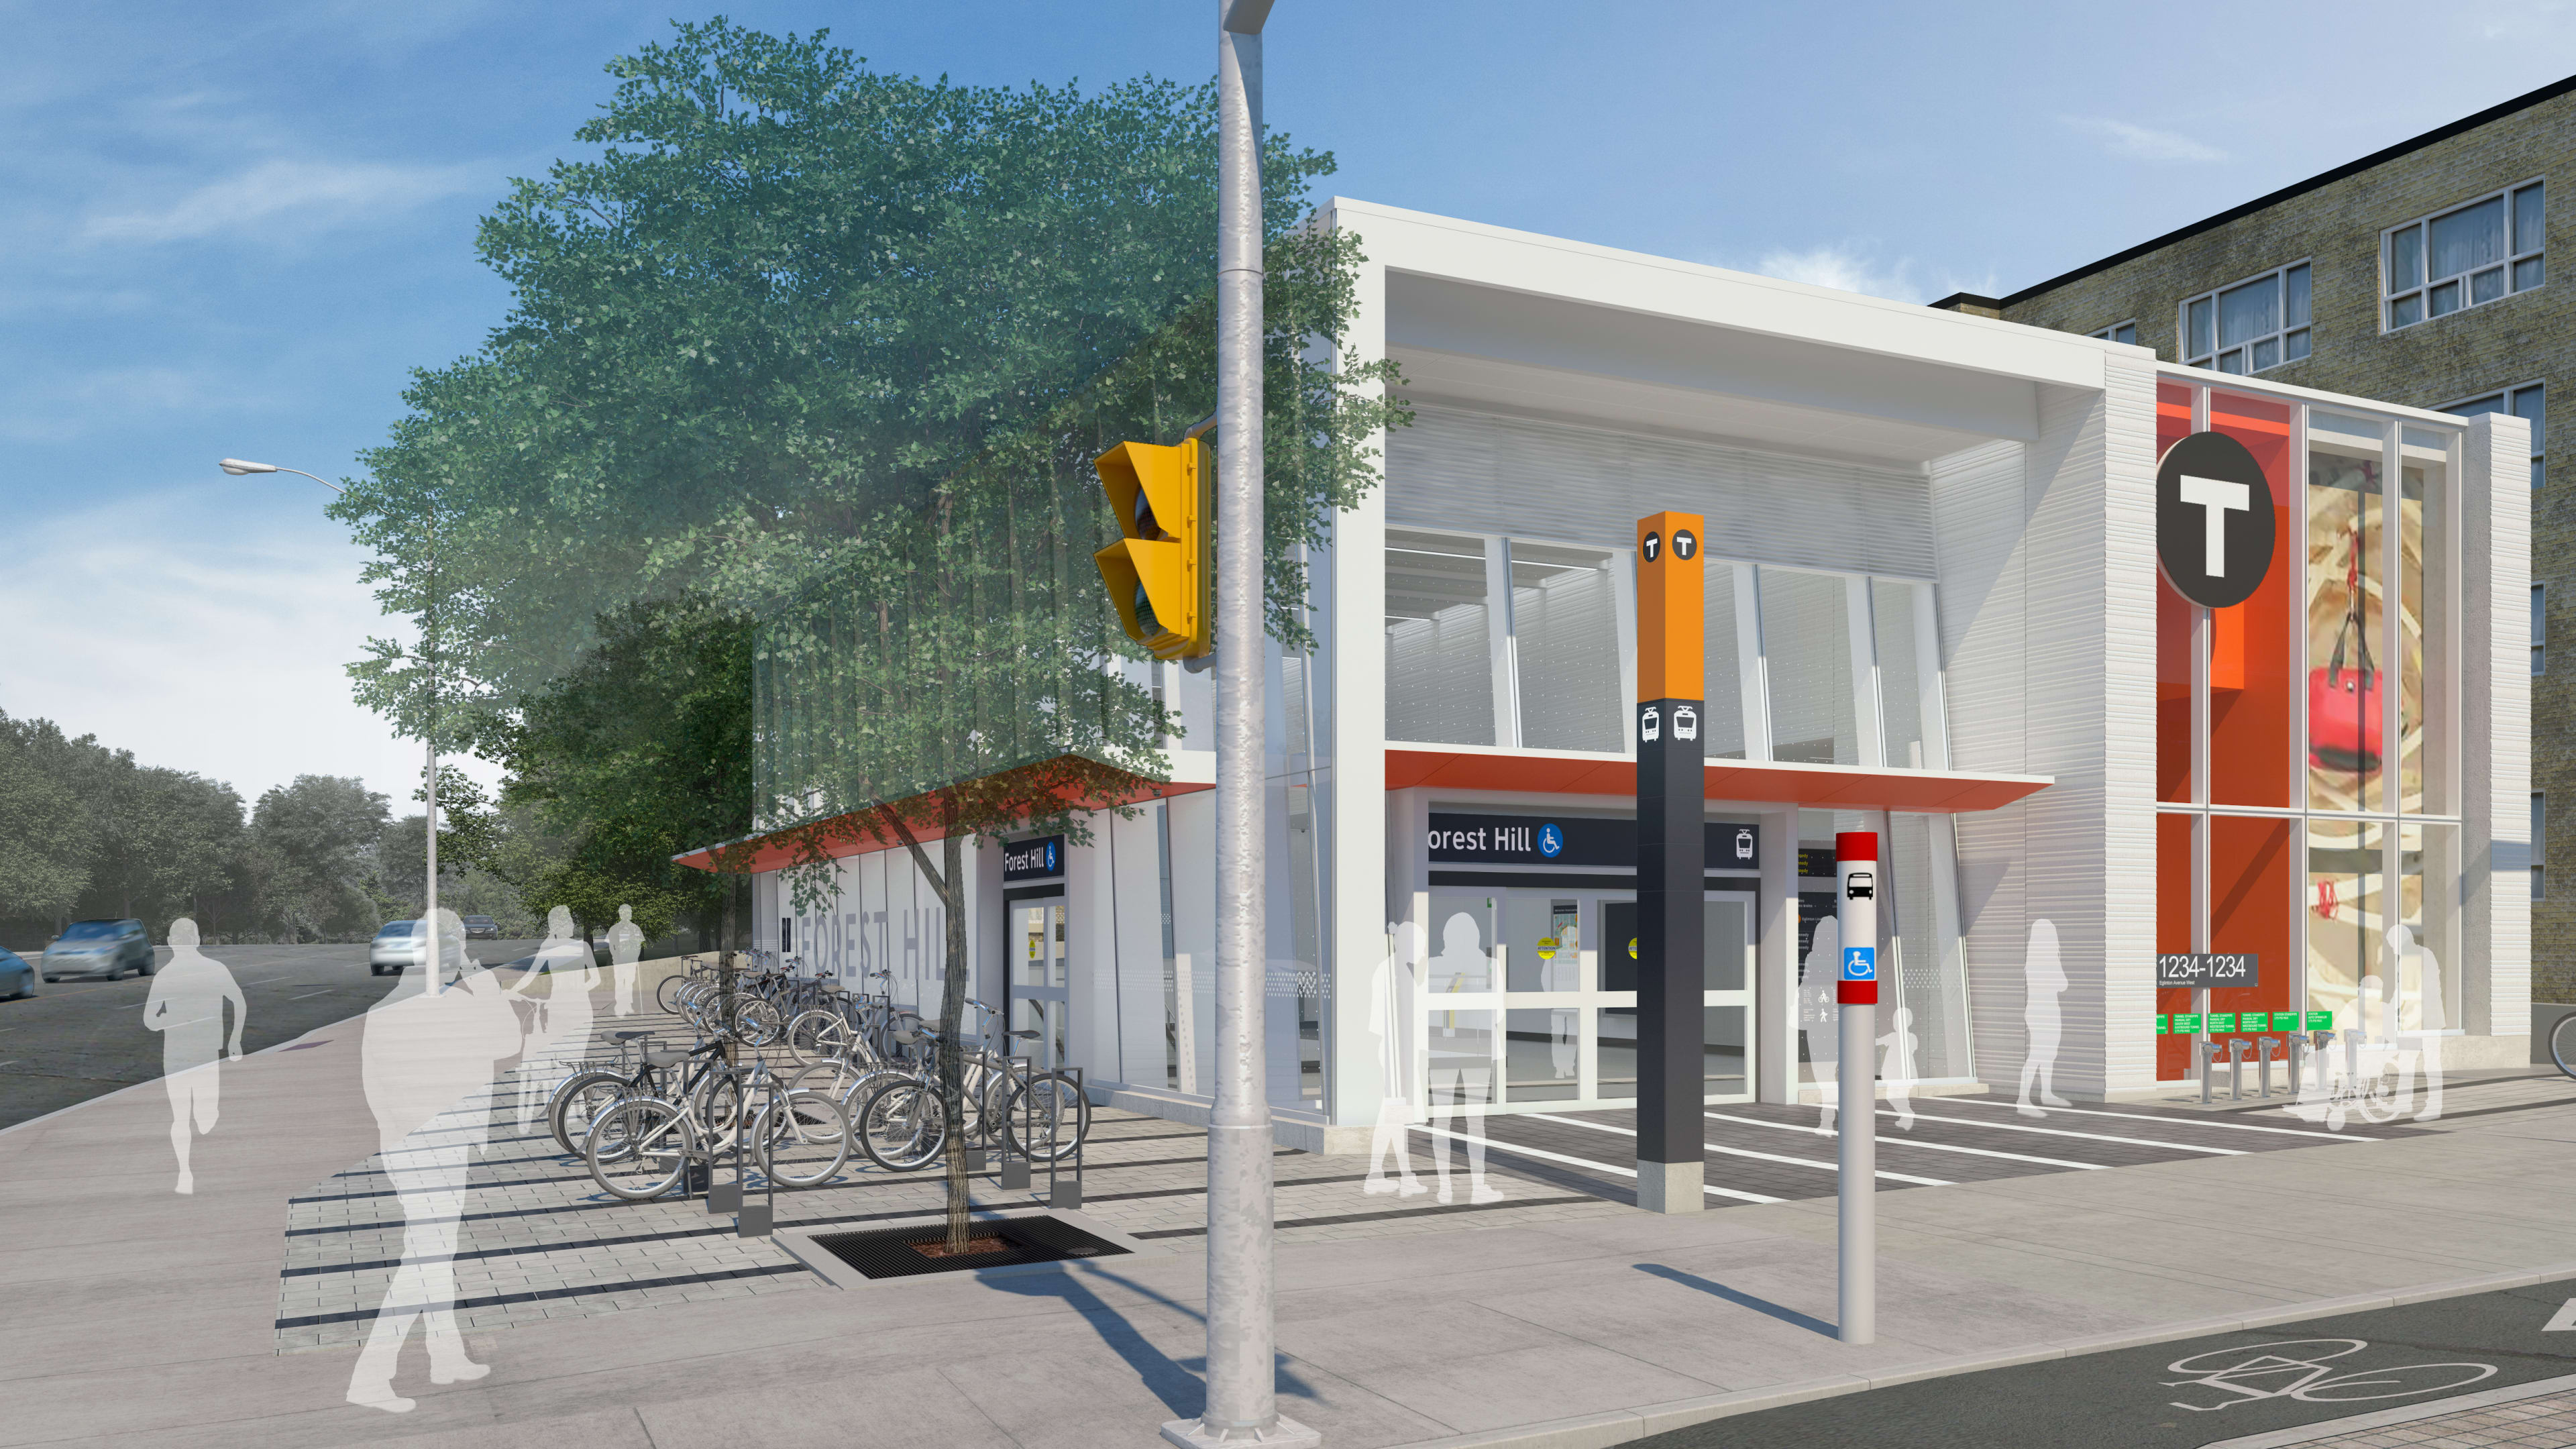 In an artist rendering, the Forest Hill station is shown up close, with bikes parked at the side.